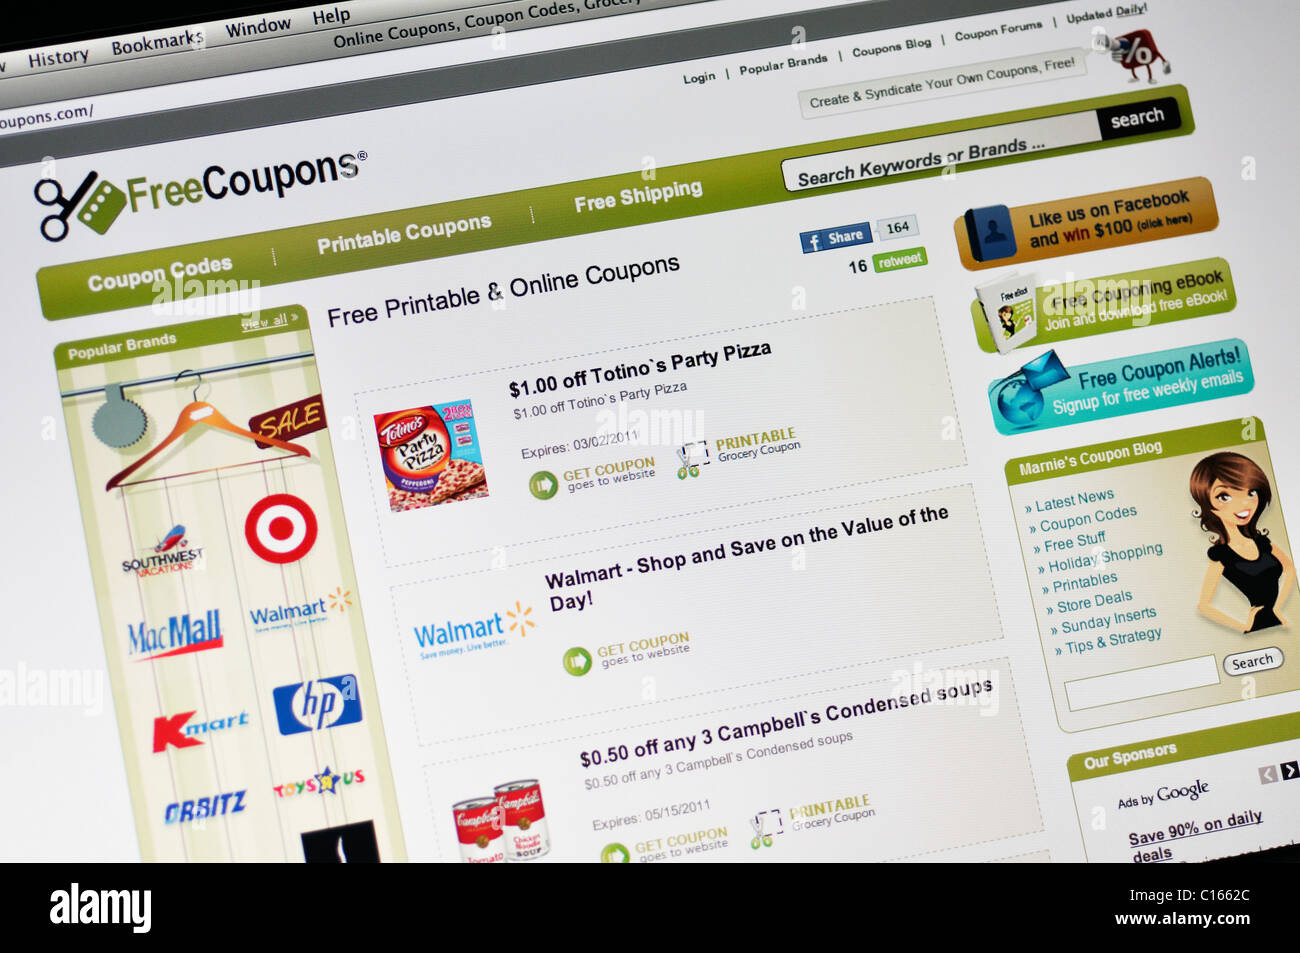 Free Coupons website - coupons, deals, savings online Stock Photo